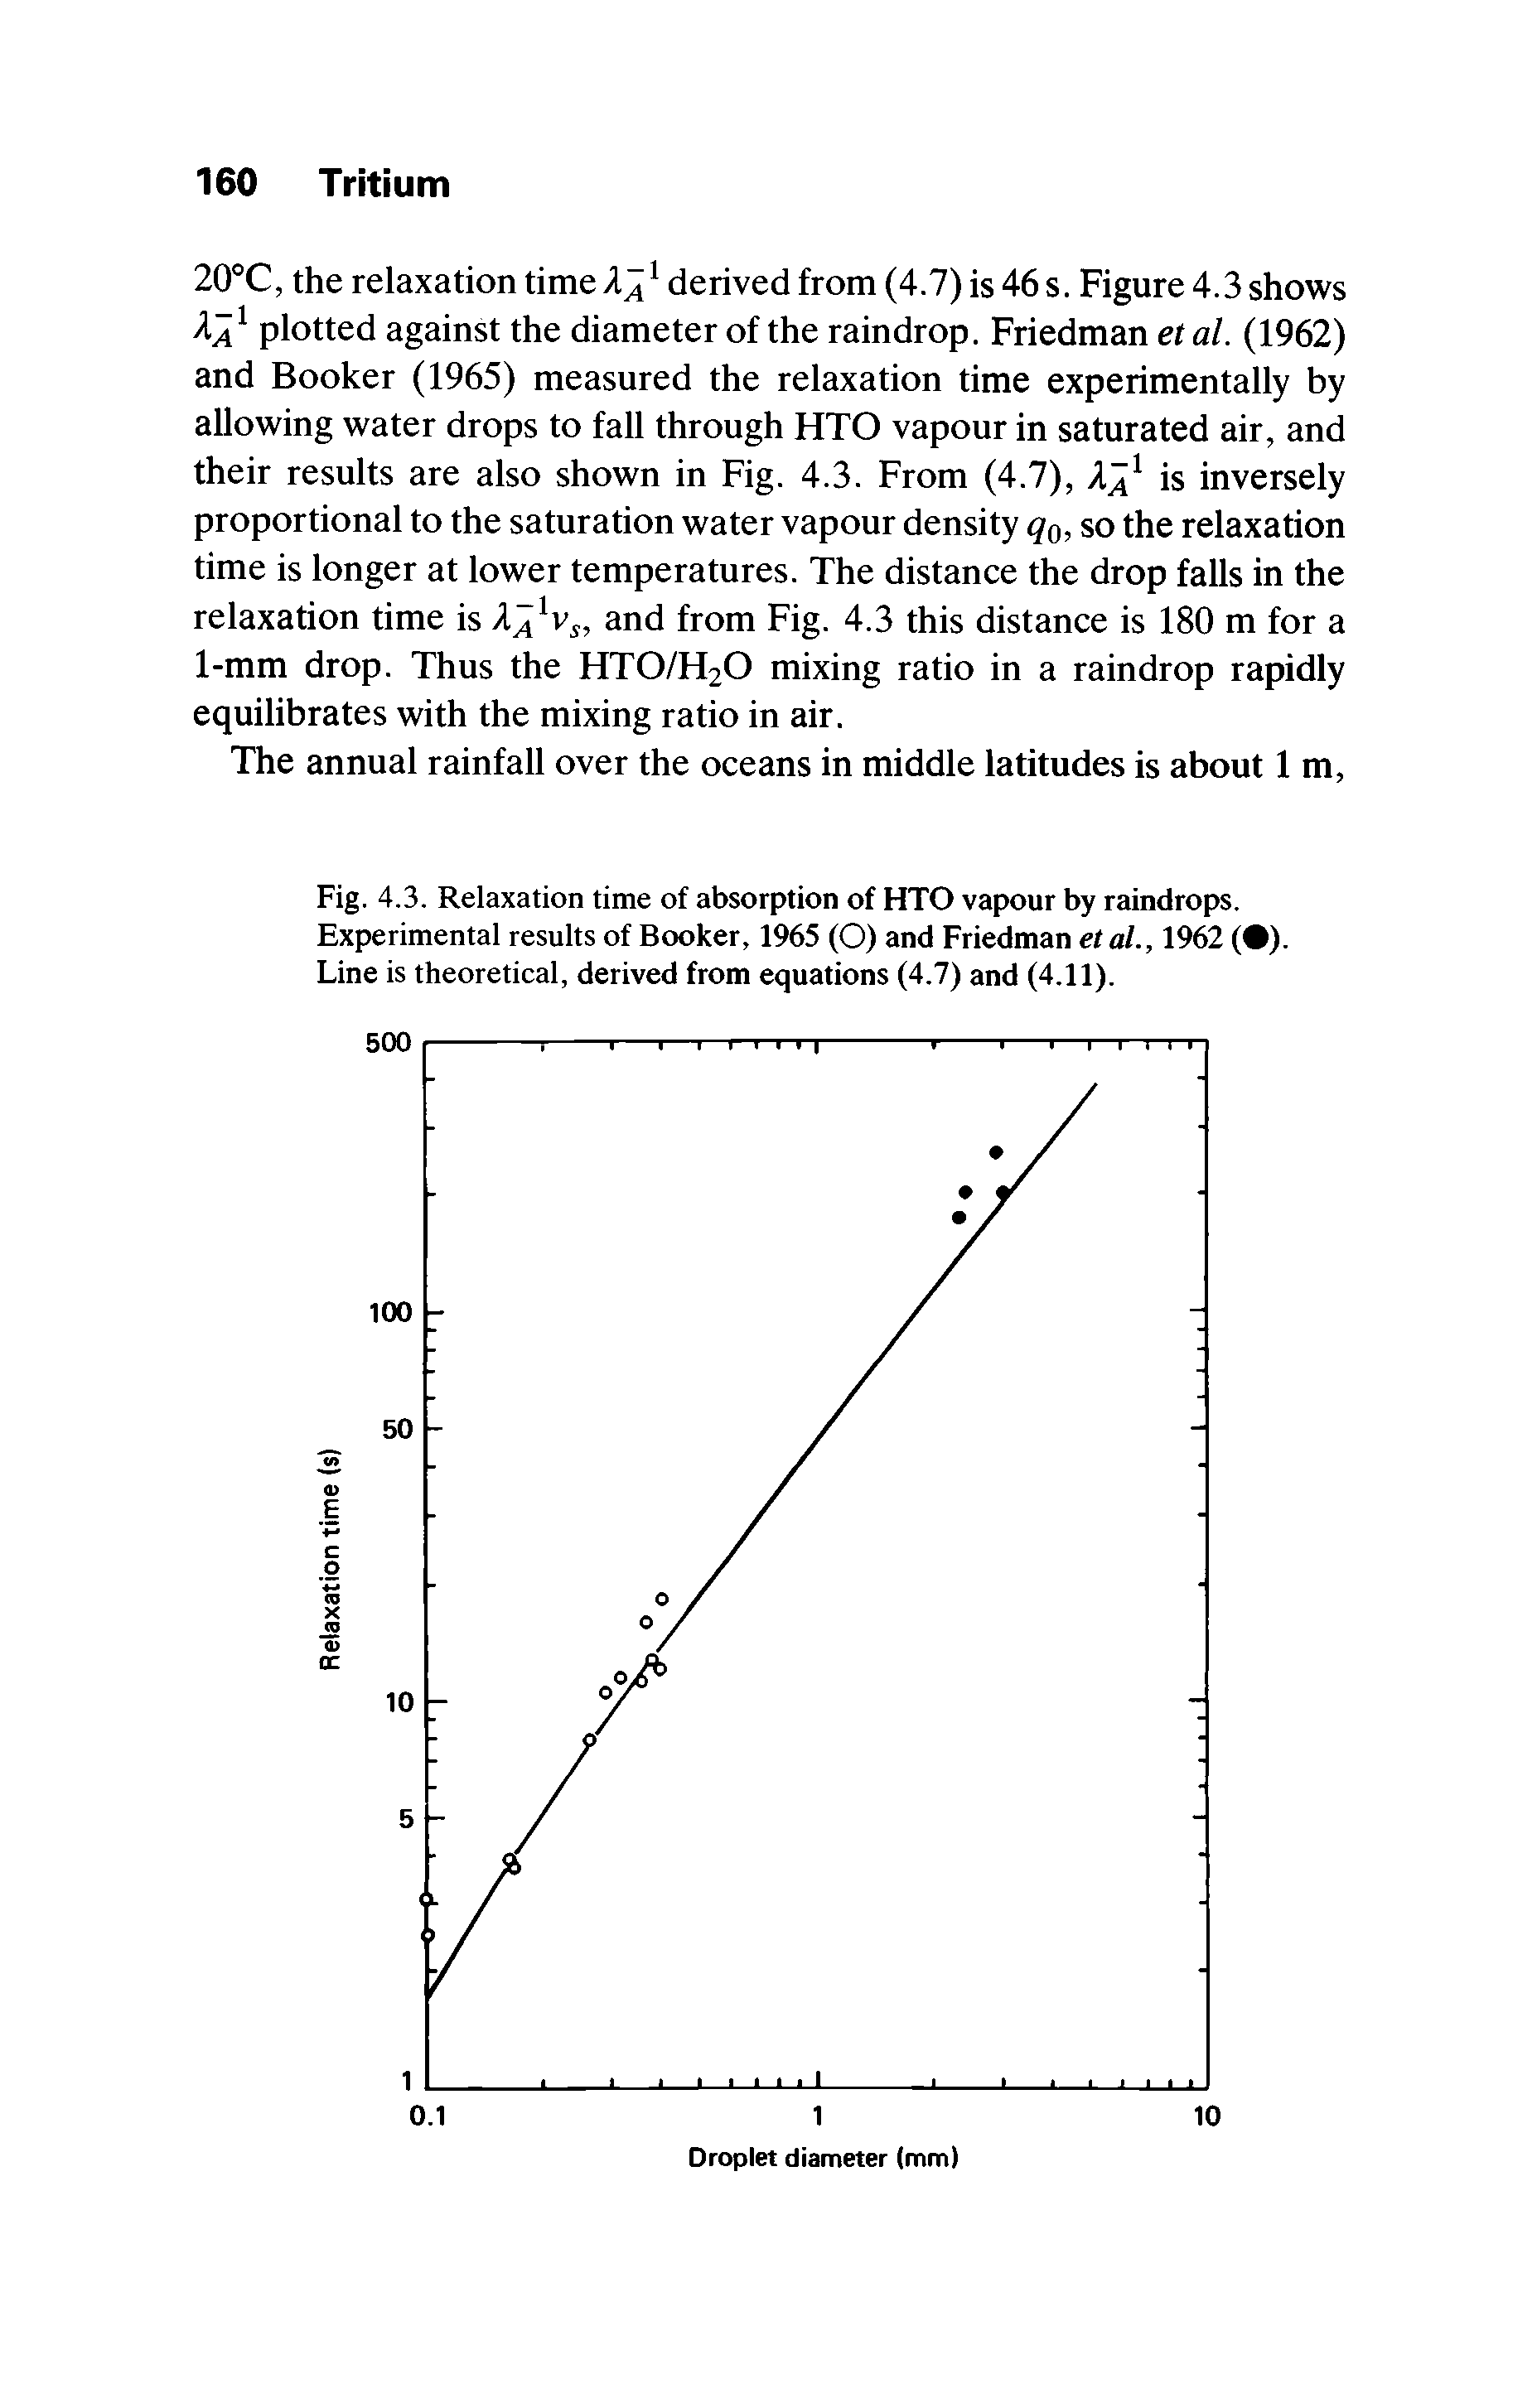 Fig. 4.3. Relaxation time of absorption of HTO vapour by raindrops. Experimental results of Booker, 1965 (O) and Friedman etal., 1962 ( ). Line is theoretical, derived from equations (4.7) and (4.11).